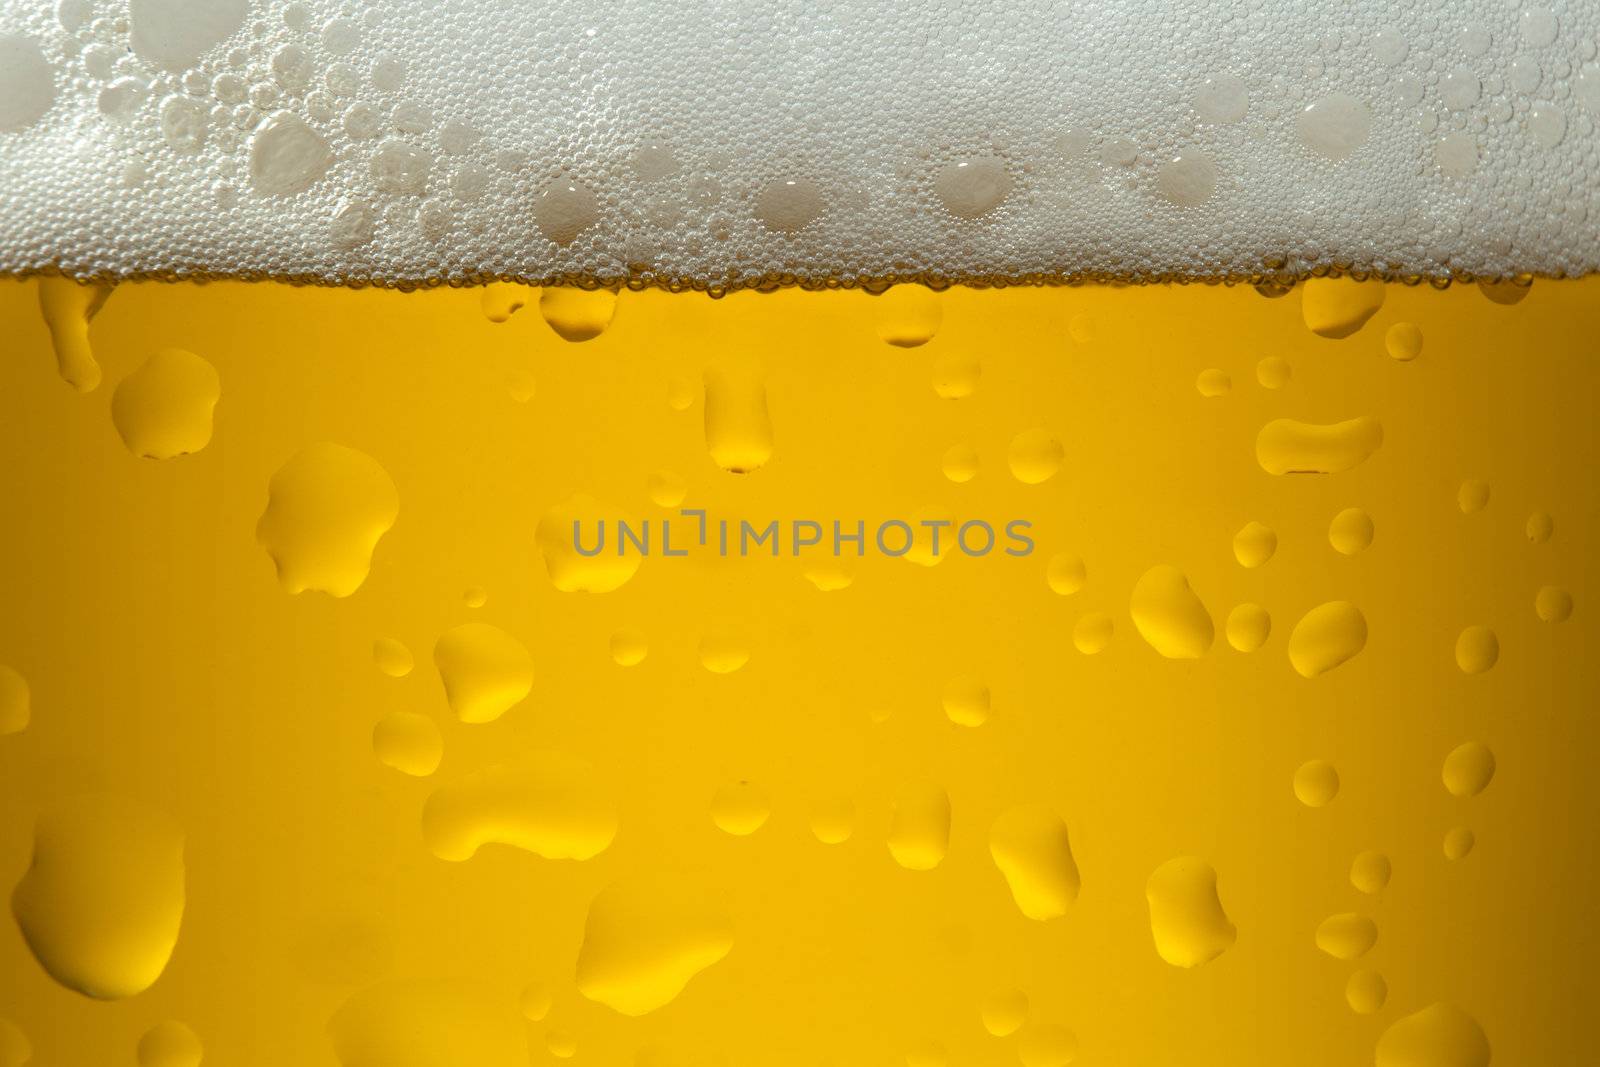 A close-up image of a yellow color beer into the glass 